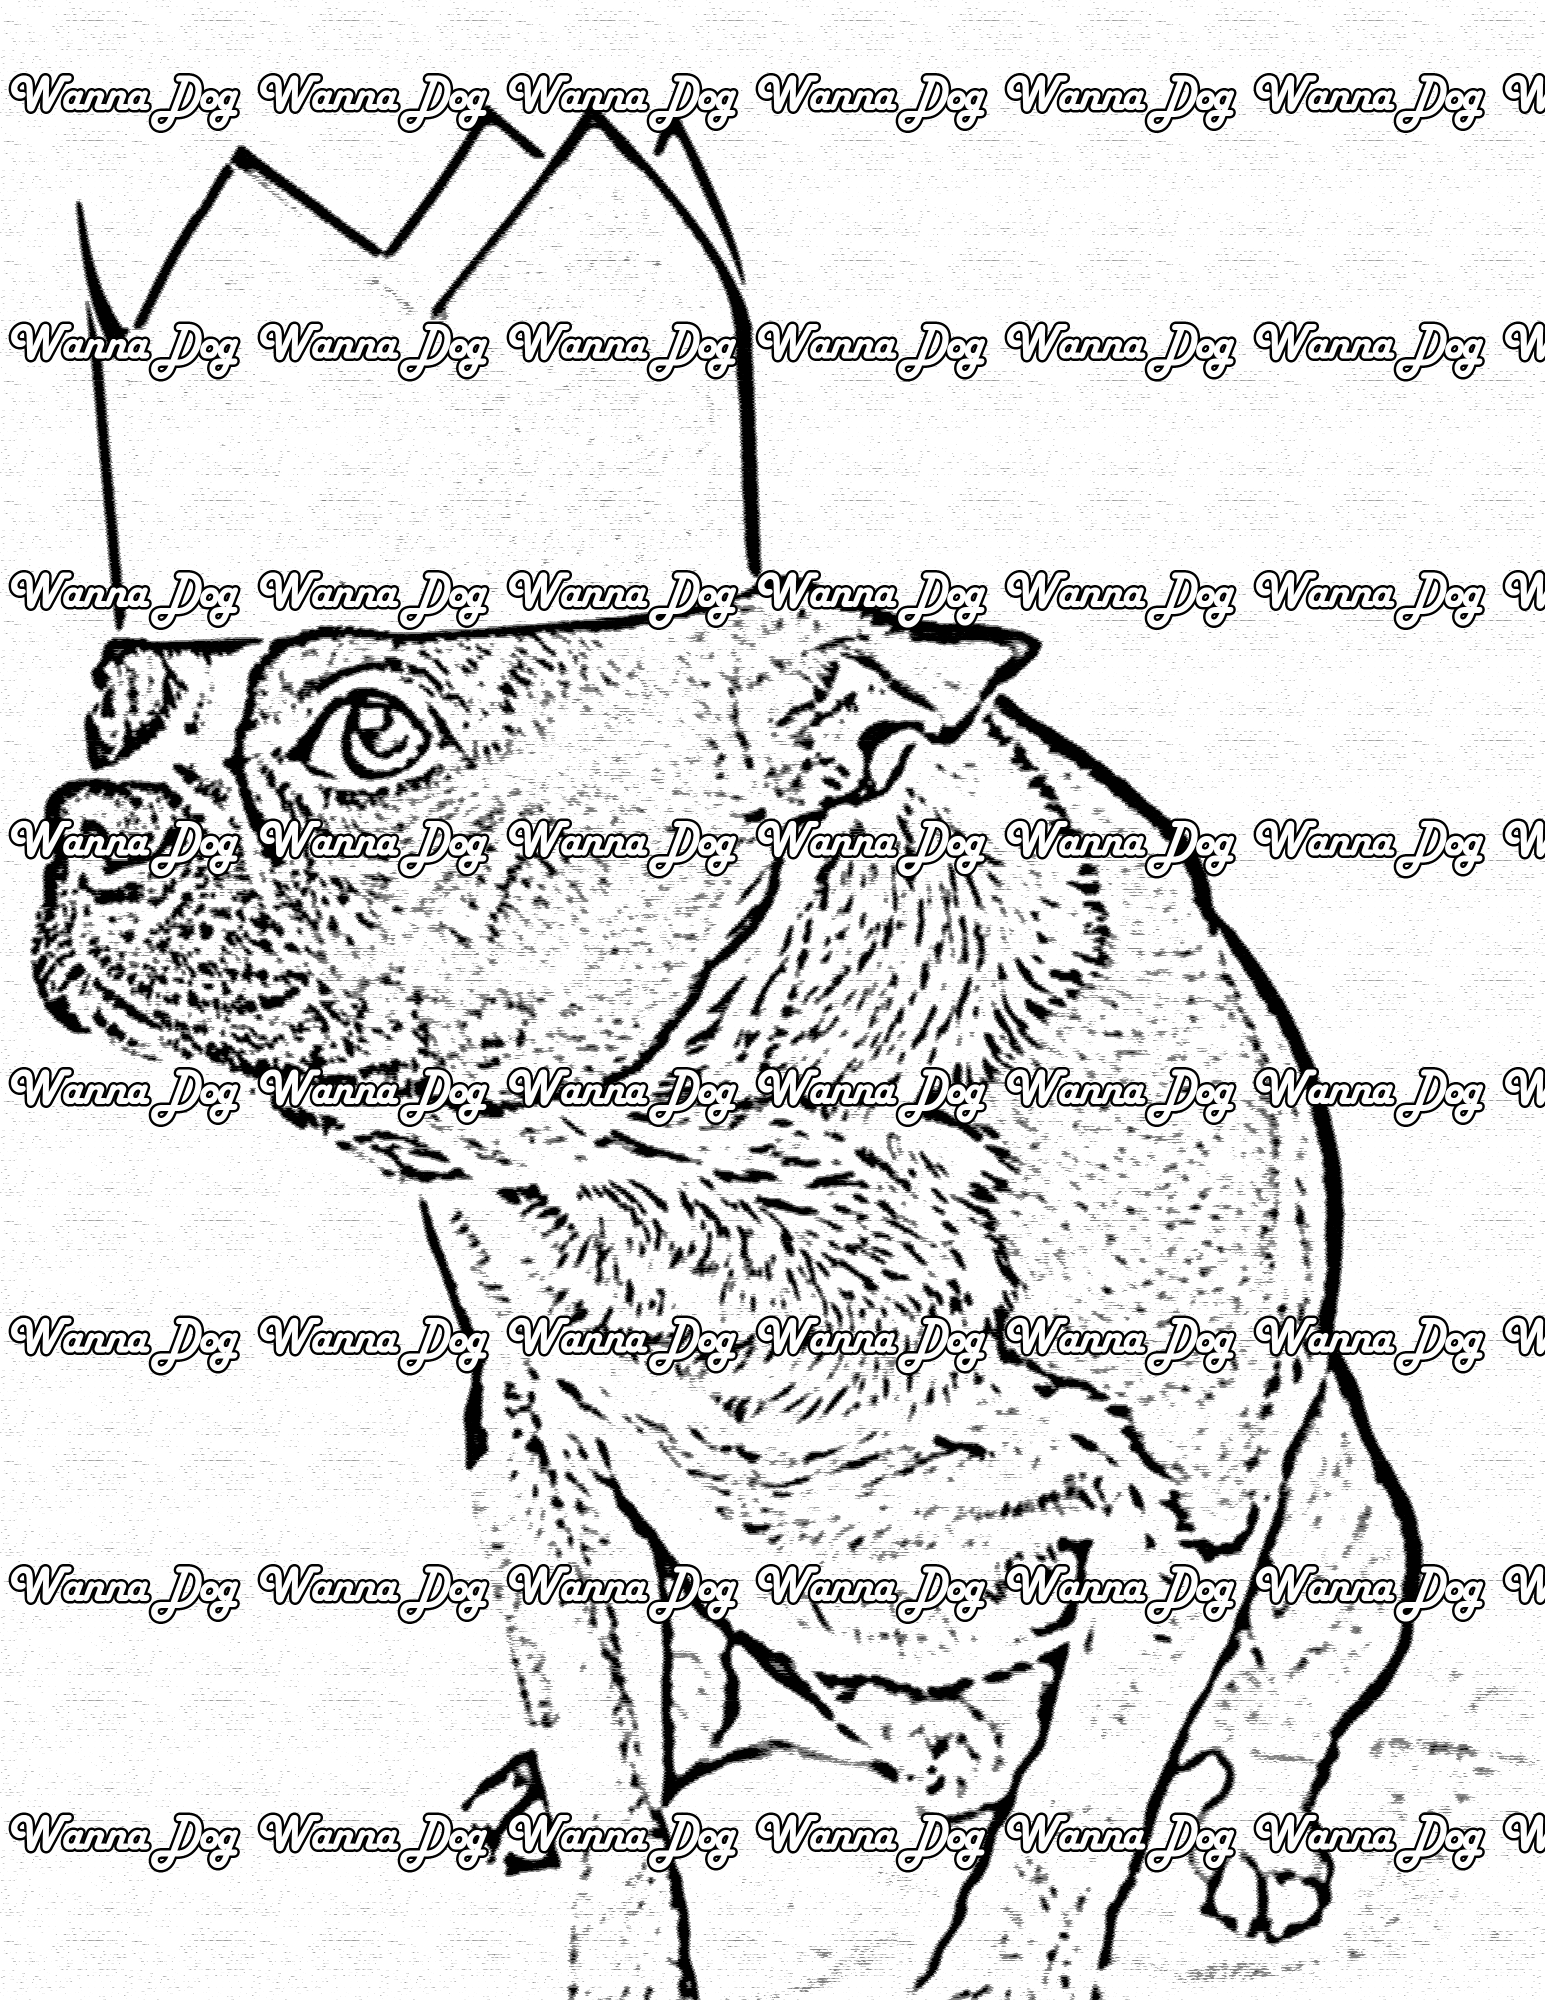 Boston Terrier Coloring Page of a Boston Terrier wearing a paper crown